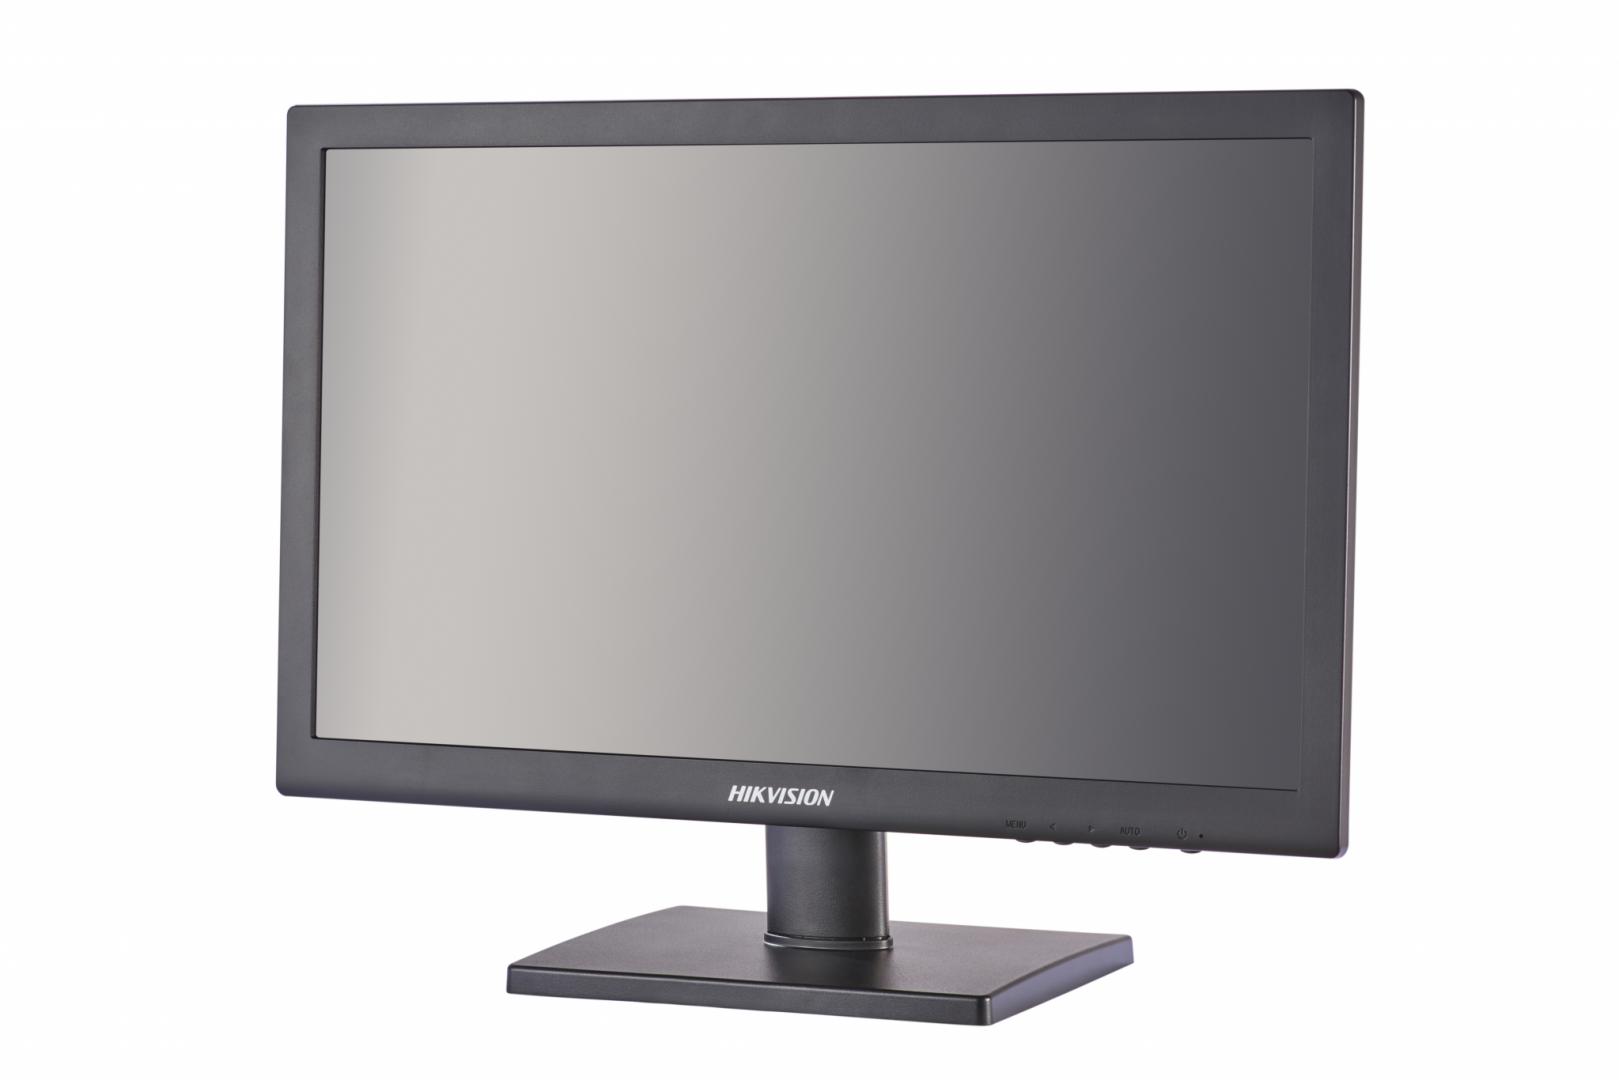 Monitor Hikvision 19"LED, DS-D5019QE-B; LED-Backlit; Screen Size: 18.5”; Max Resolution: 1366×768; Response Time: 5ms; Viewing Angle: Horizontal 90°, Vertical 65°; 3D comb filter; 3D De-interlace; 3D noise reduction; Input: HDMI, VGA; VESA stand bracket.